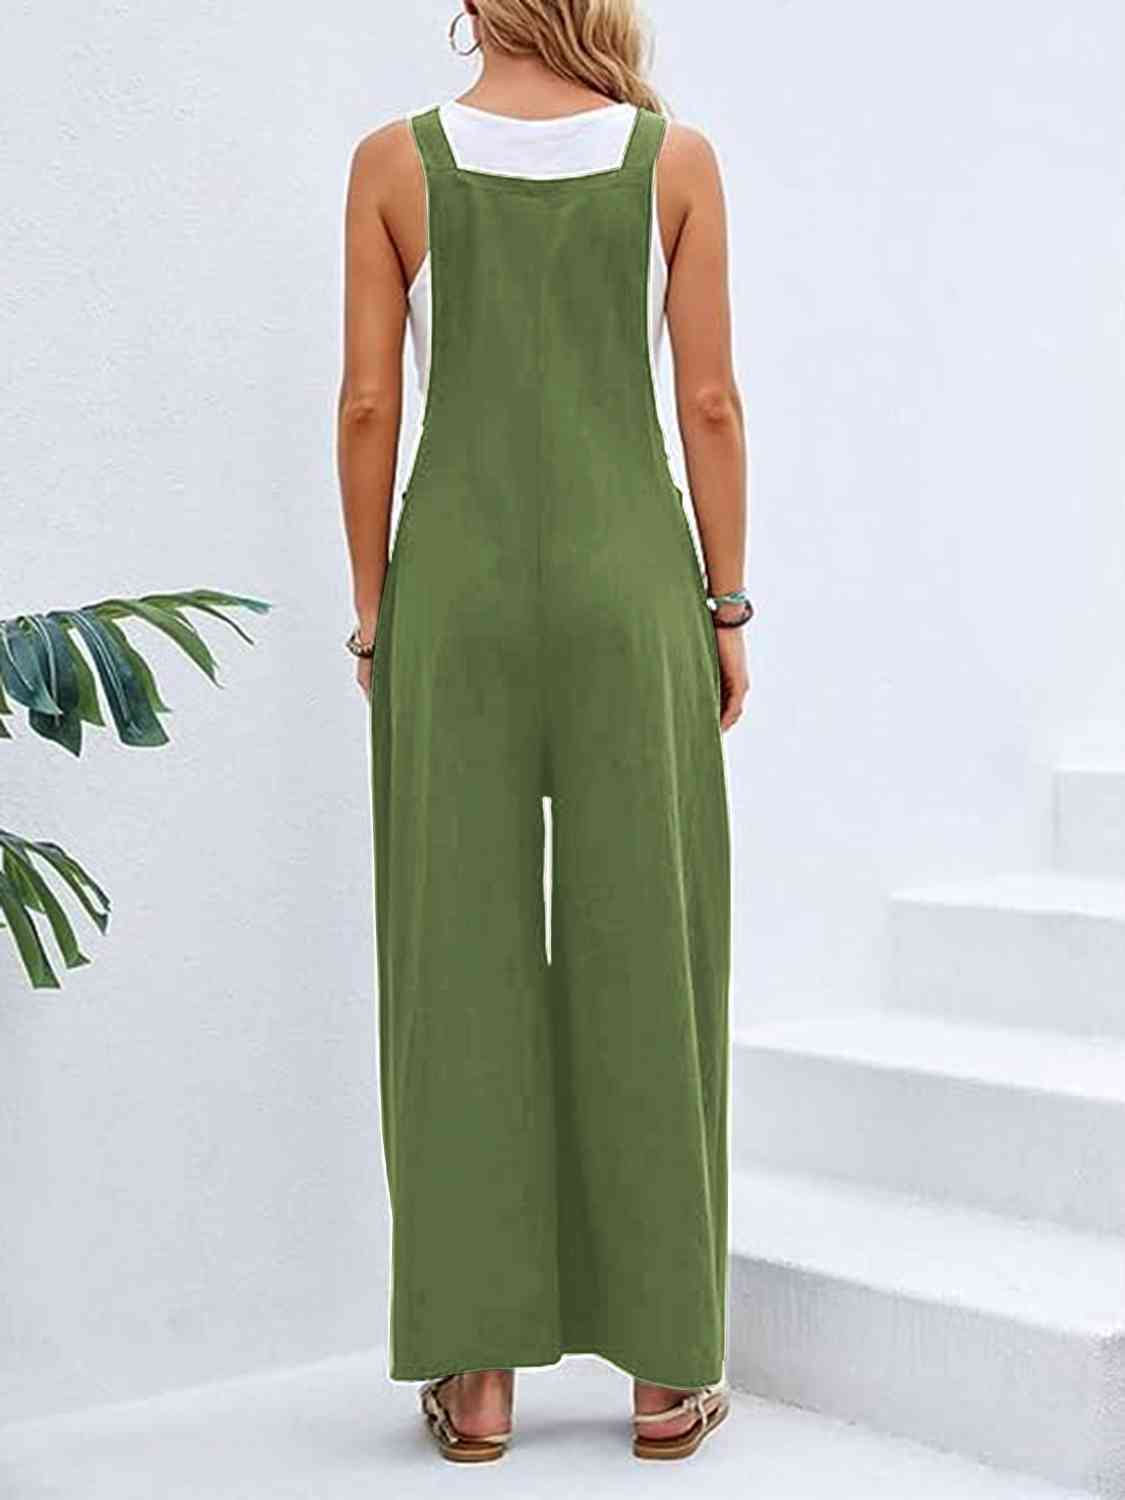 Women’s Full Size Wide Leg Overalls with Pockets